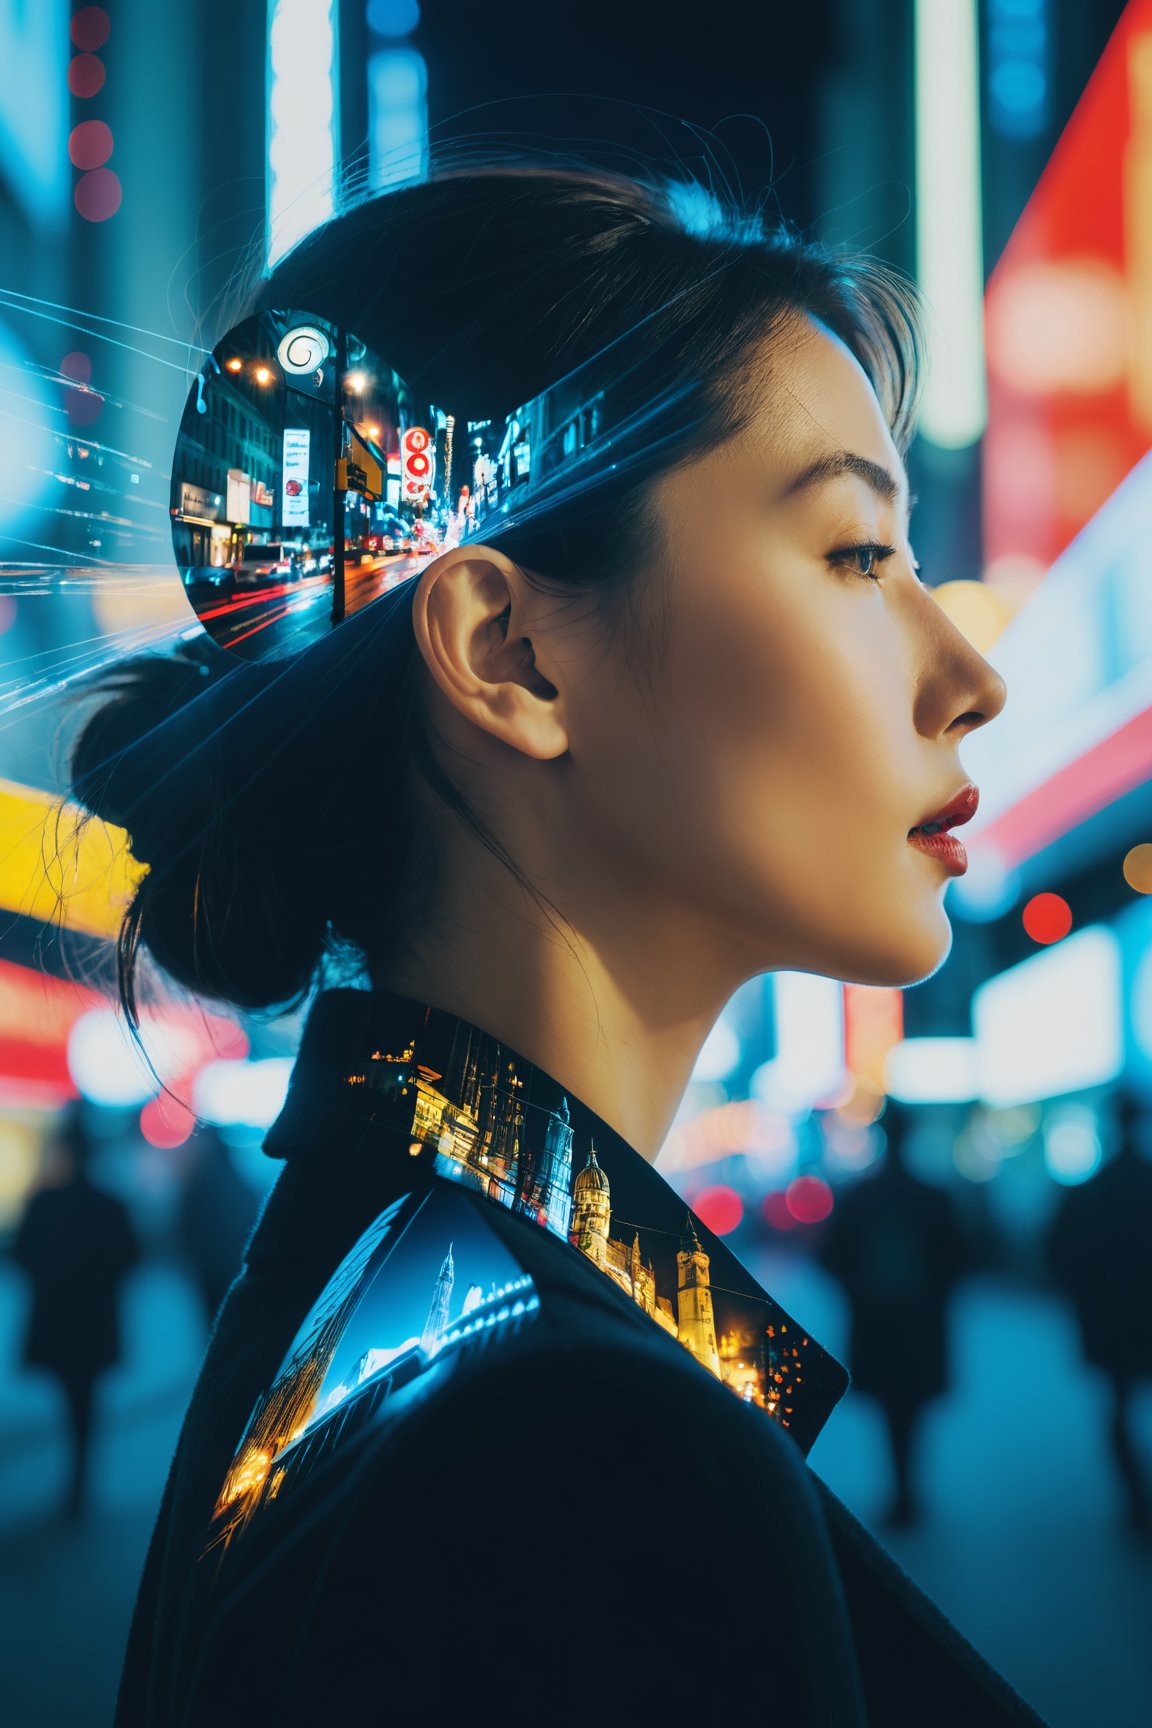 A surreal scene where a woman's profile is superimposed under the city's lights,  capturing the essence of urban life through multiple exposures